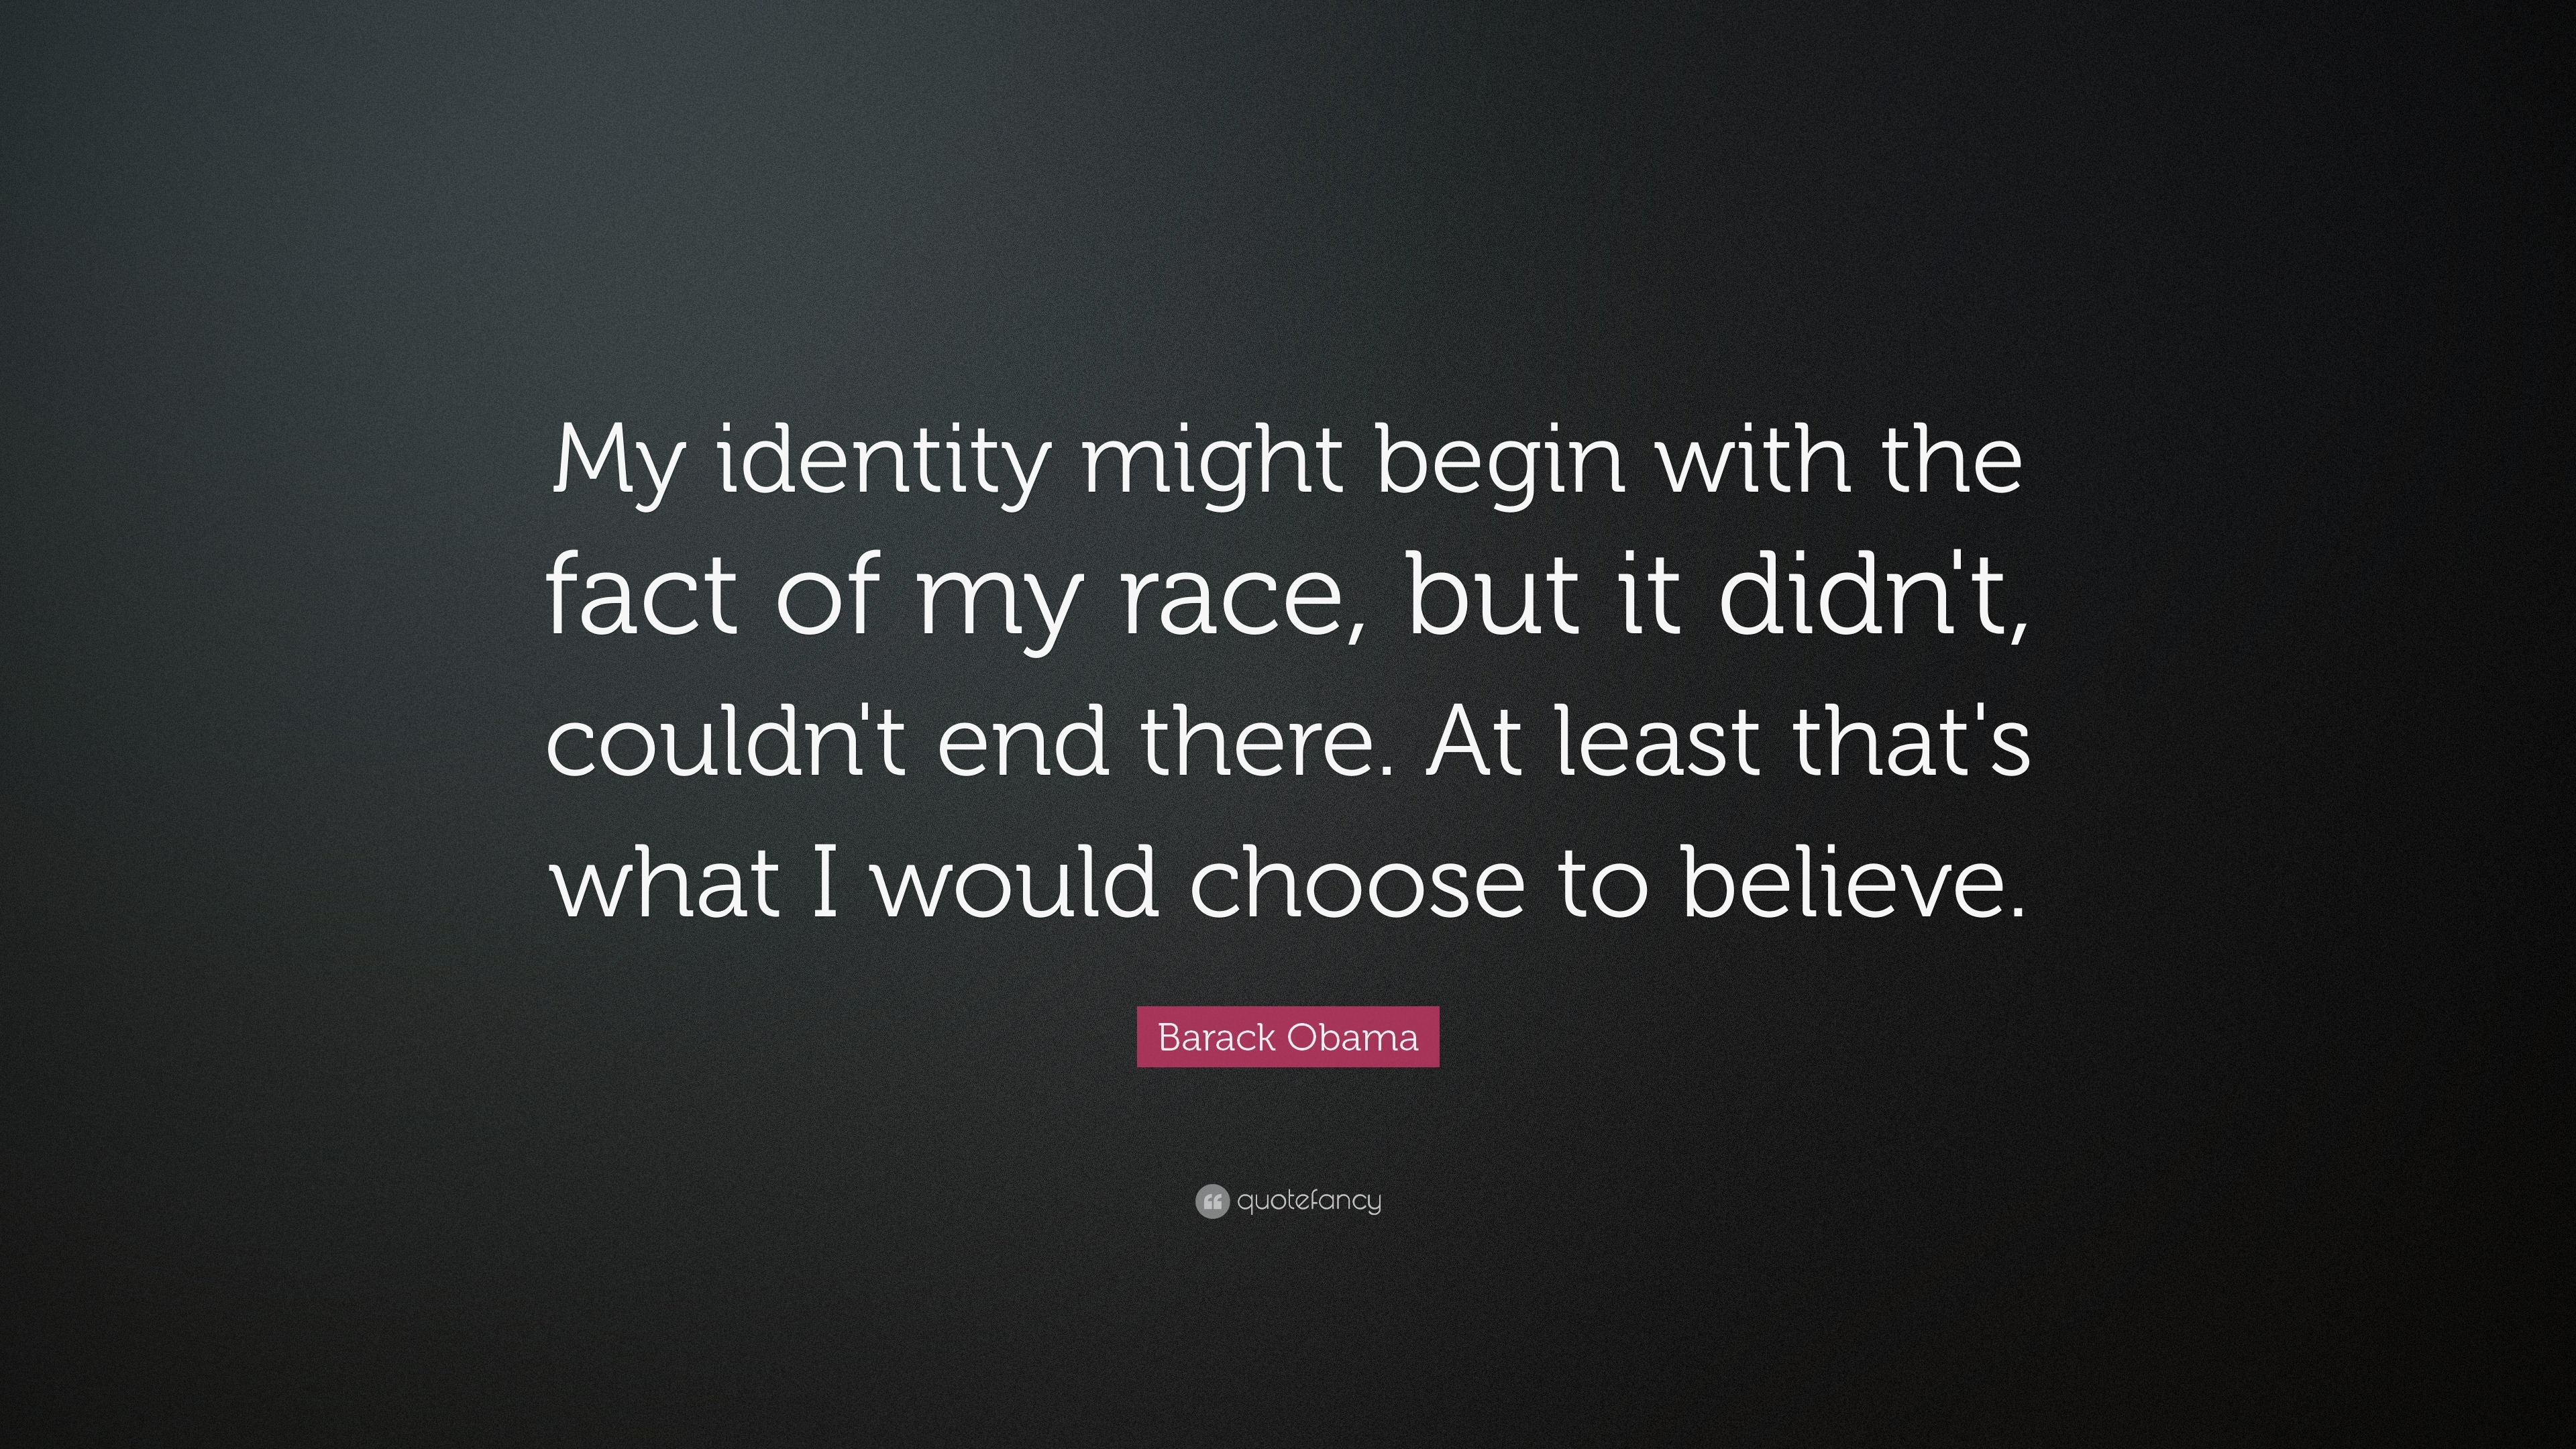 Barack Obama Quote: “My identity might begin with the fact of my race